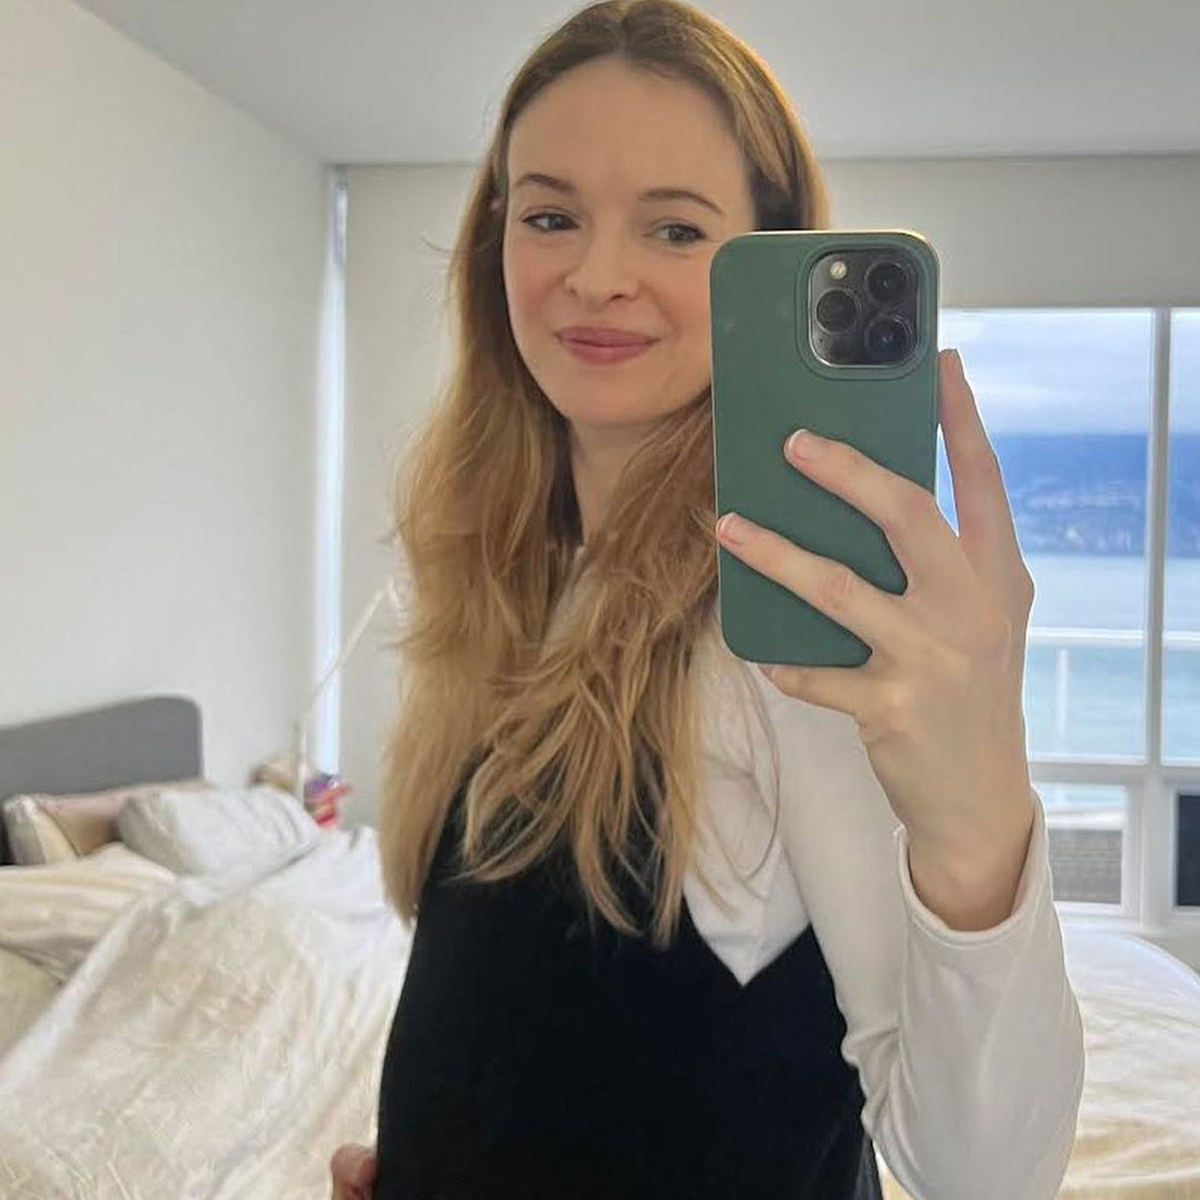 The Flash's Danielle Panabaker Is Pregnant With Baby No. 2